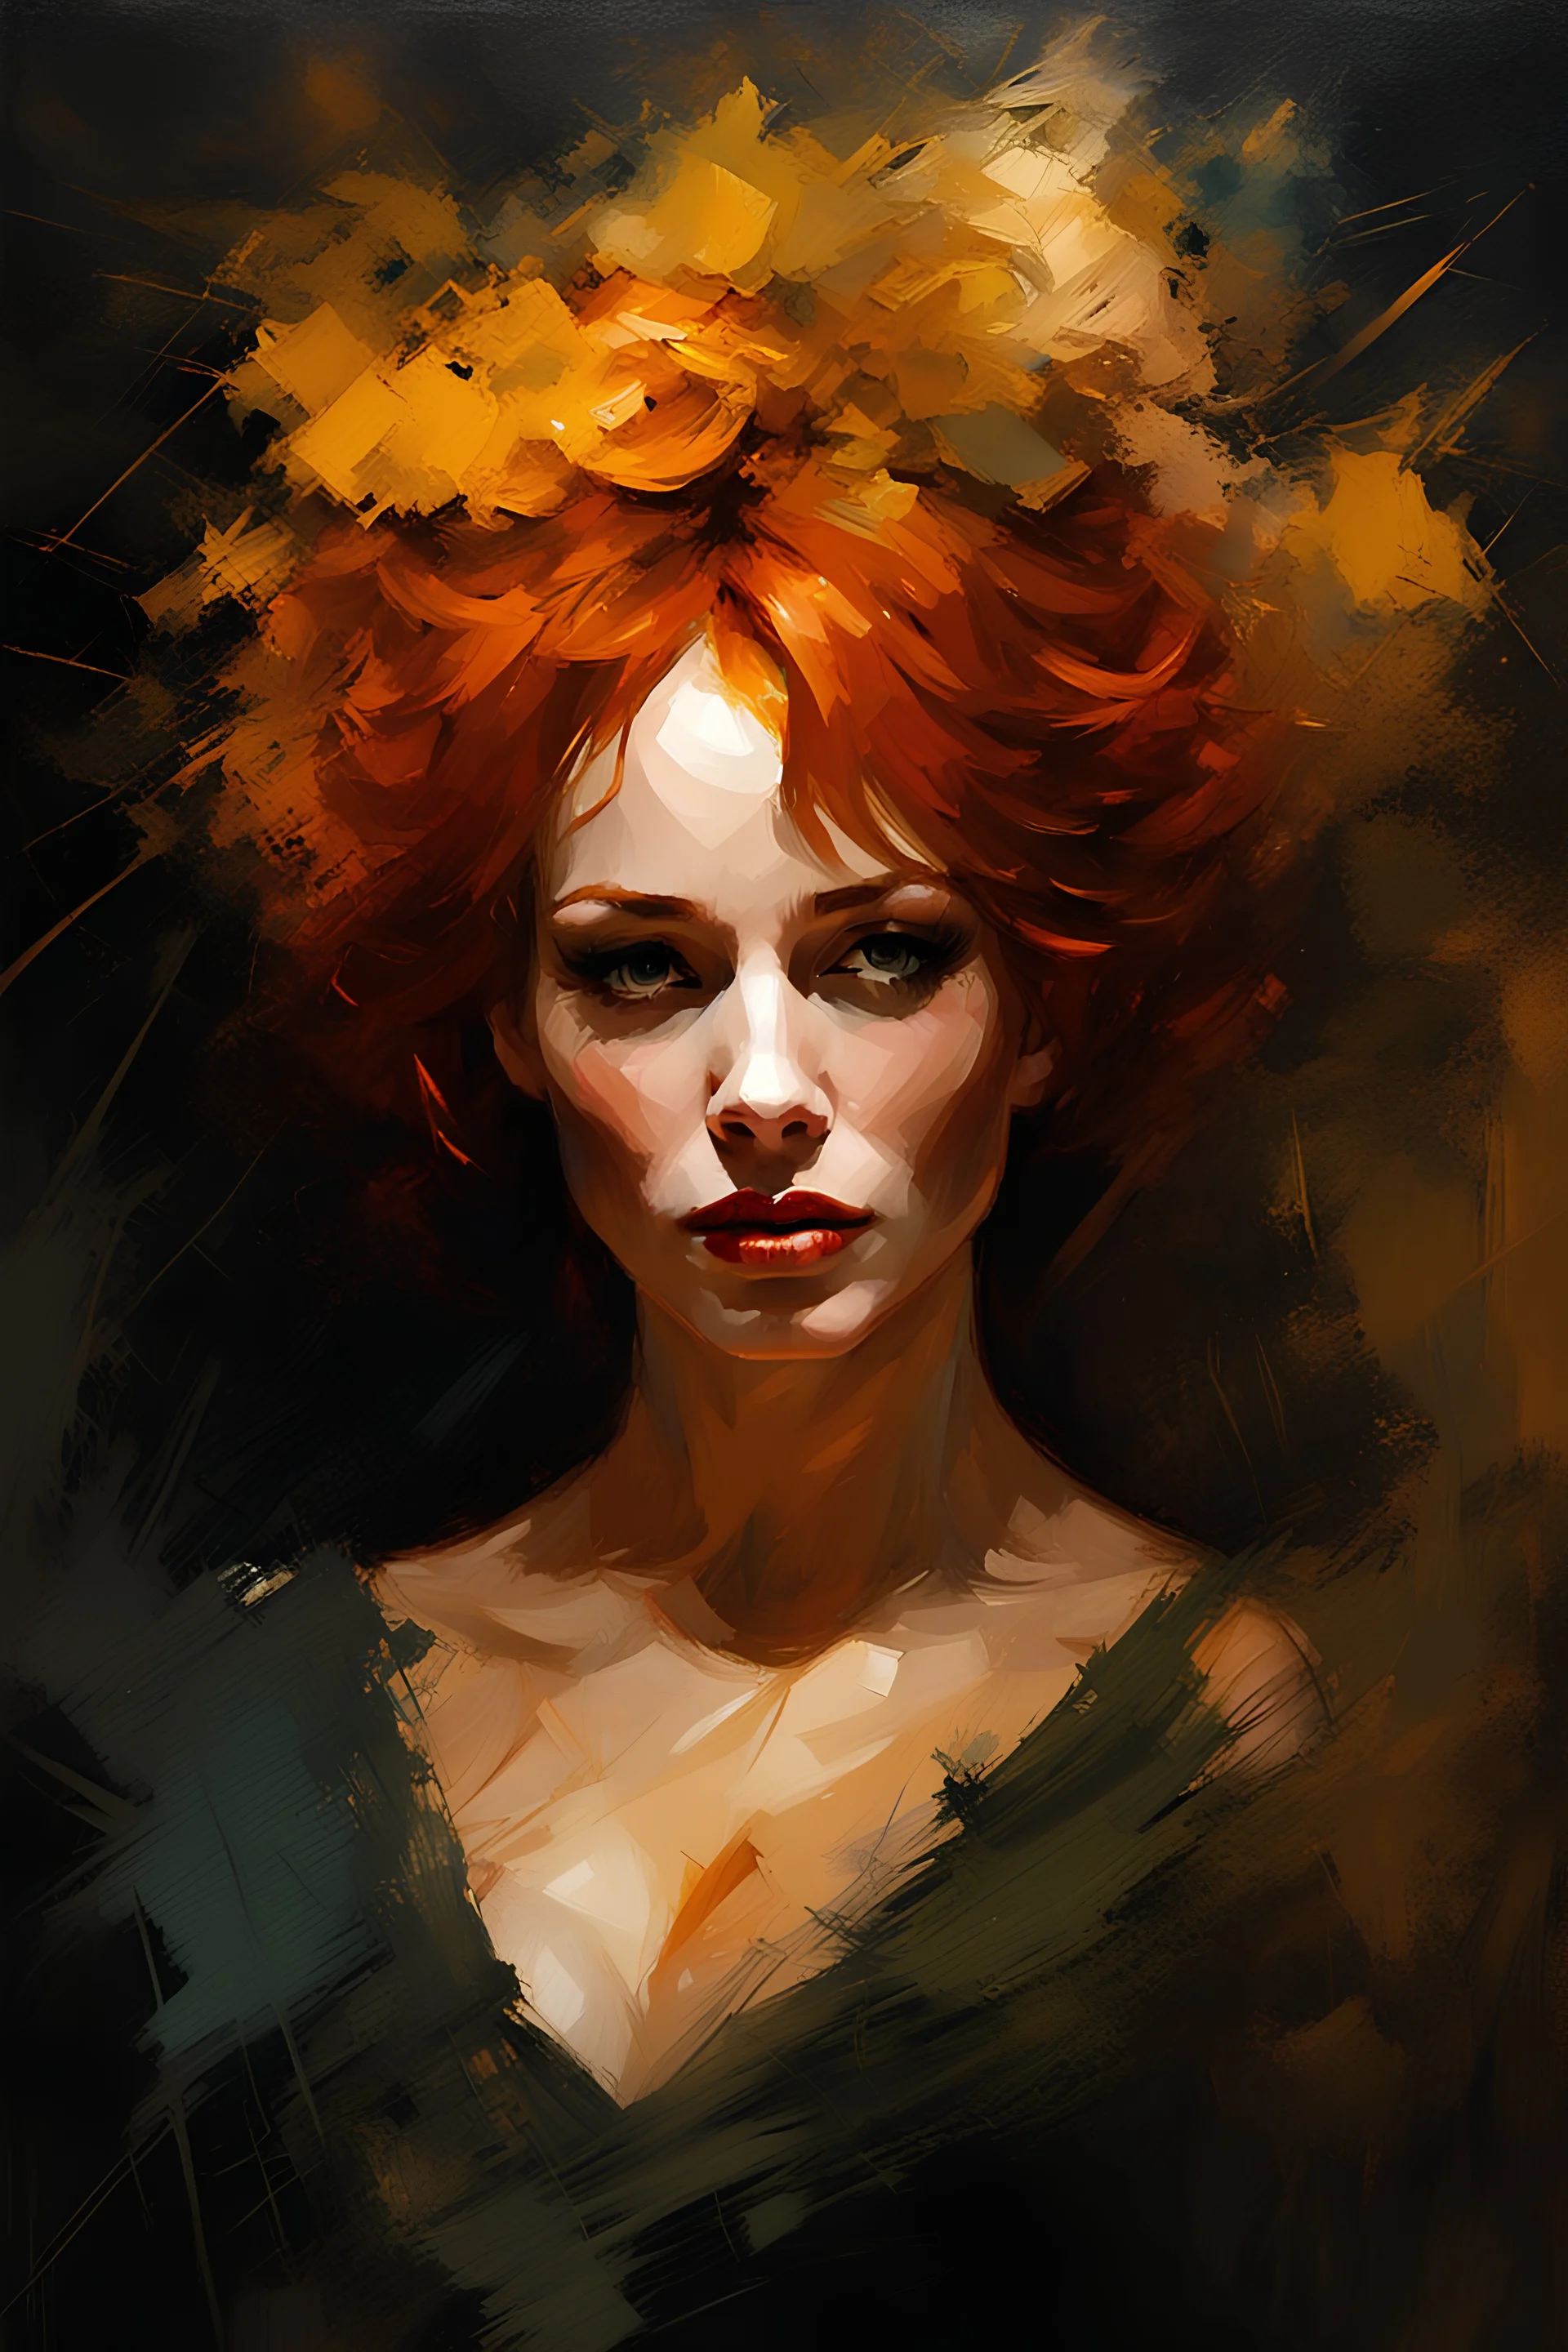 christina hendricks as saffron at a dance in a barn :: dark mysterious esoteric atmosphere :: digital matt painting with rough paint strokes by Jeremy Mann + Carne Griffiths + Leonid Afremov, black canvas